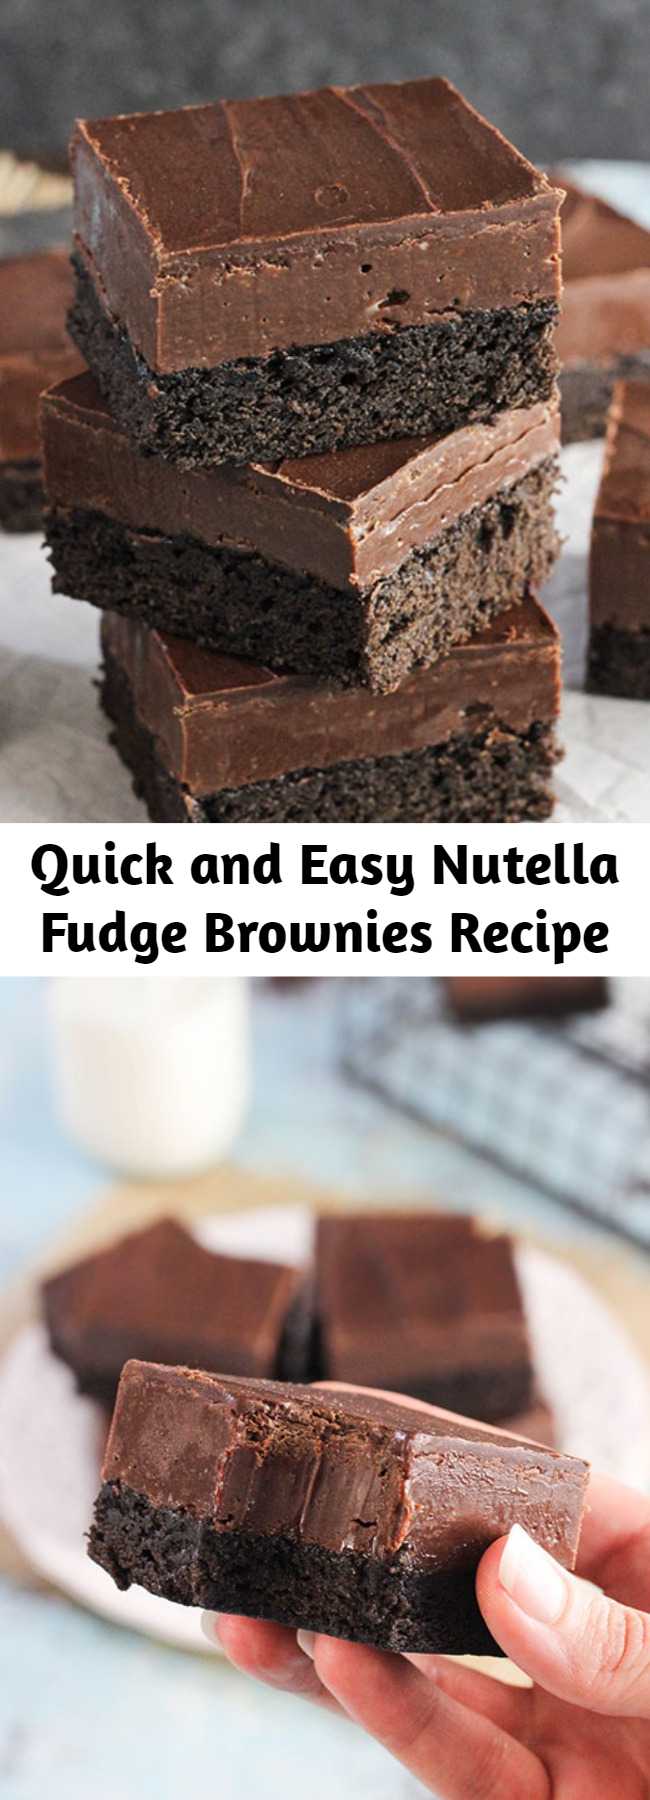 Quick and Easy Nutella Fudge Brownies Recipe - These Nutella Fudge Brownies are decadent little bars with a dense brownie on the bottom, Nutella fudge in the middle and chocolate on top. You can’t go wrong with this chocolatey confection!